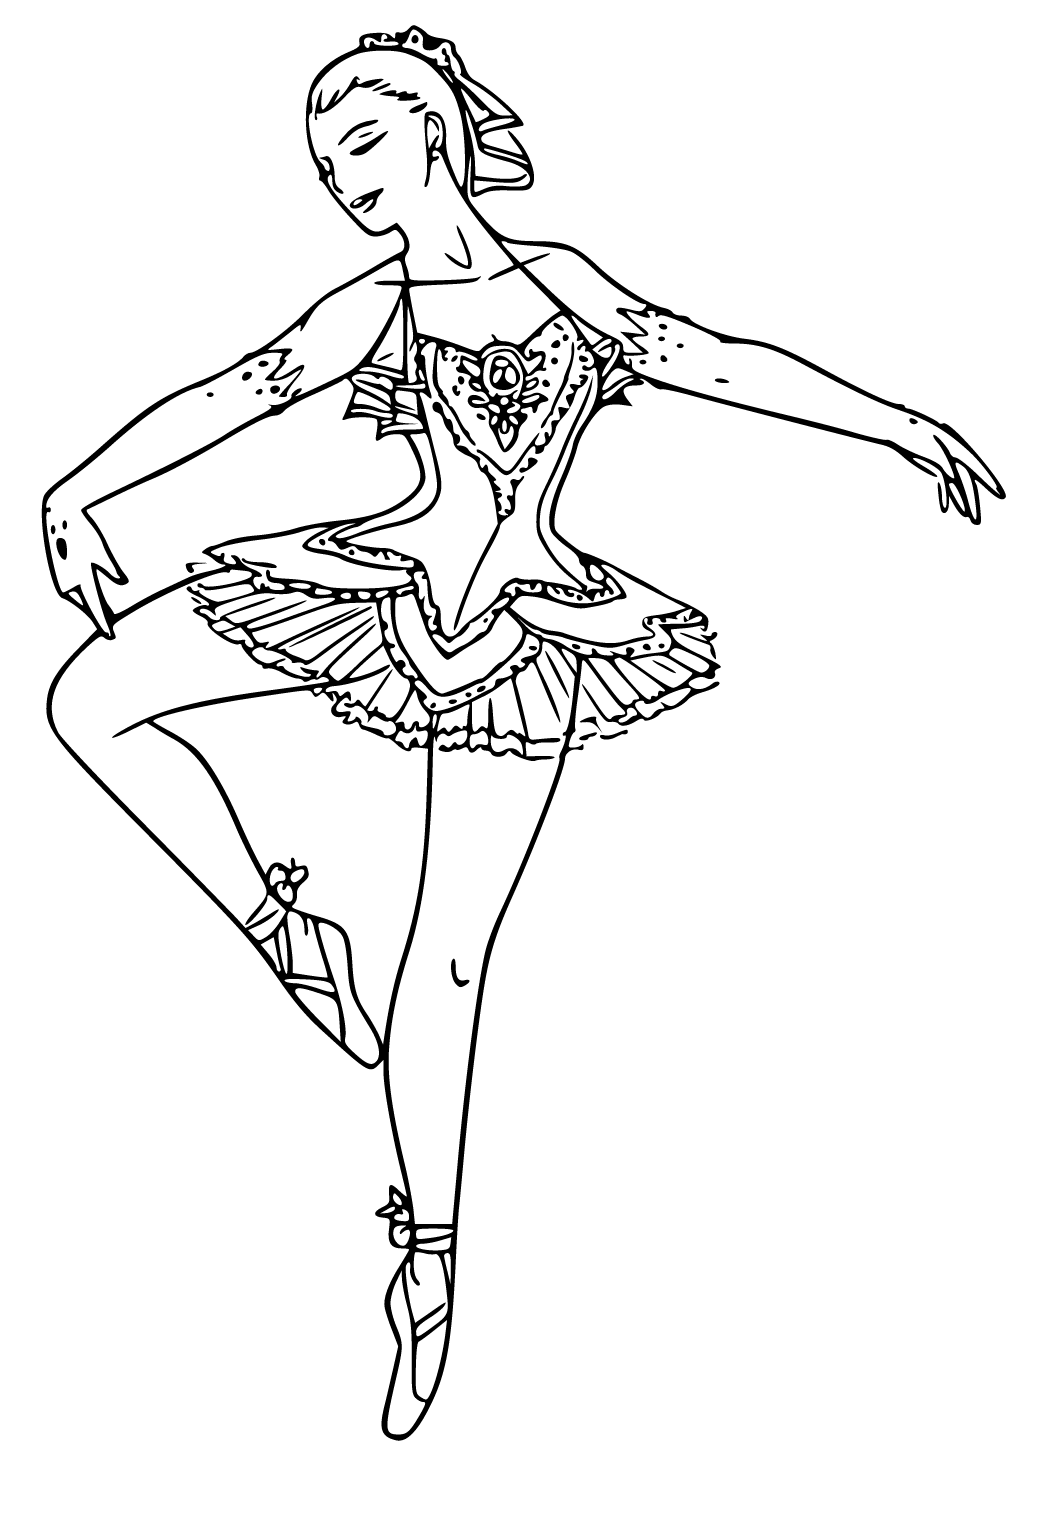 Free Printable Ballerina Dress Coloring Page for Adults and Kids ...